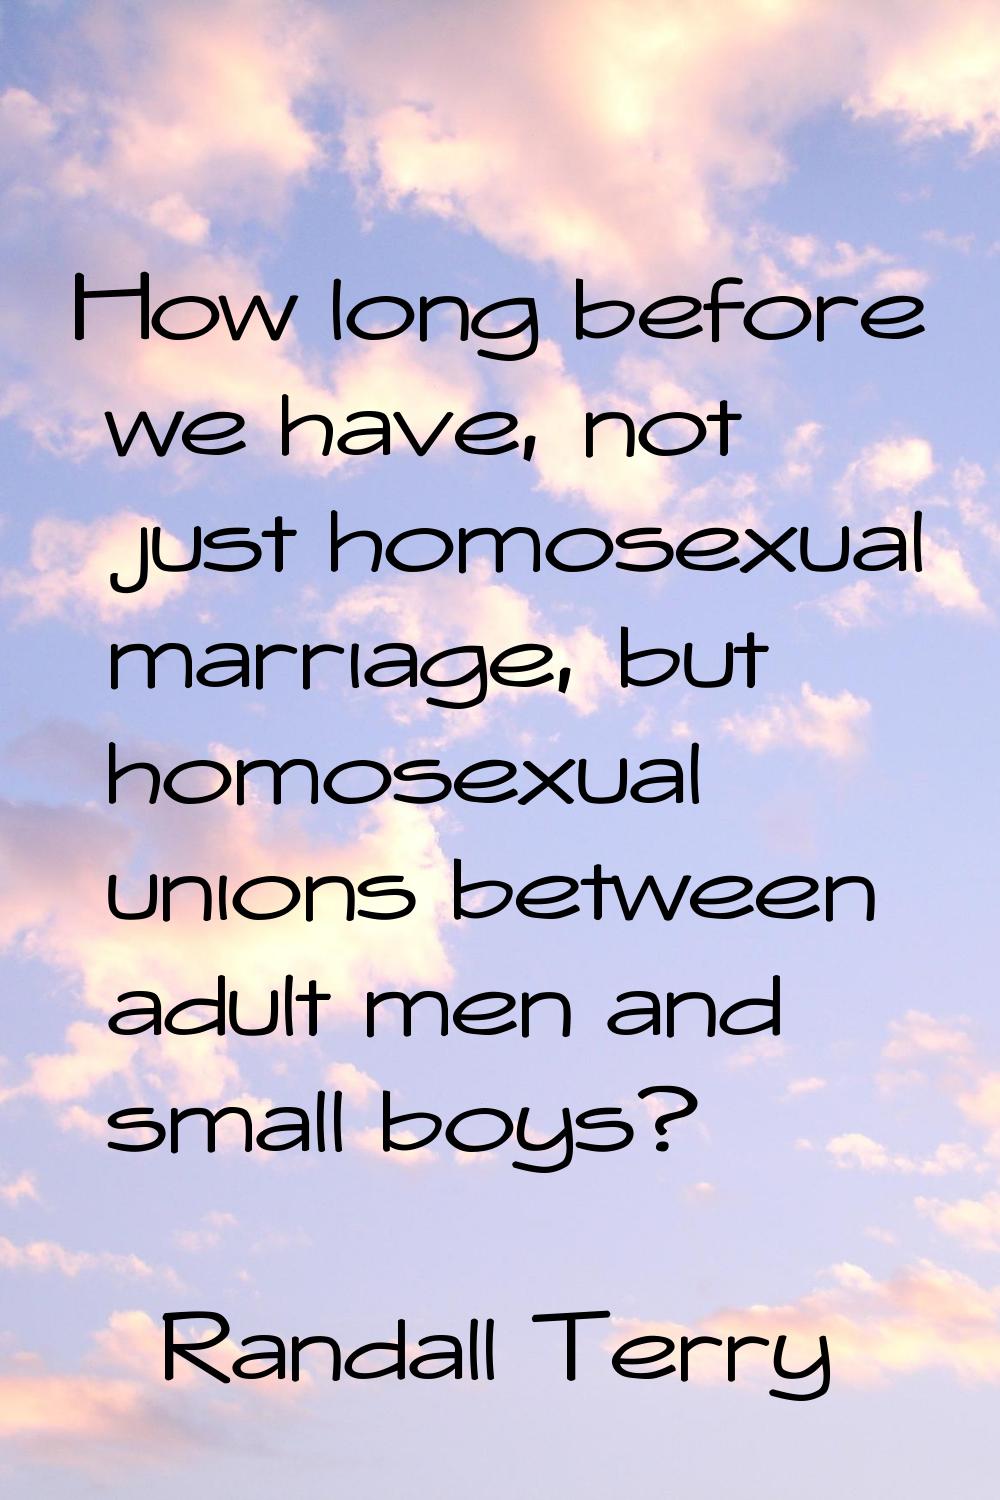 How long before we have, not just homosexual marriage, but homosexual unions between adult men and 